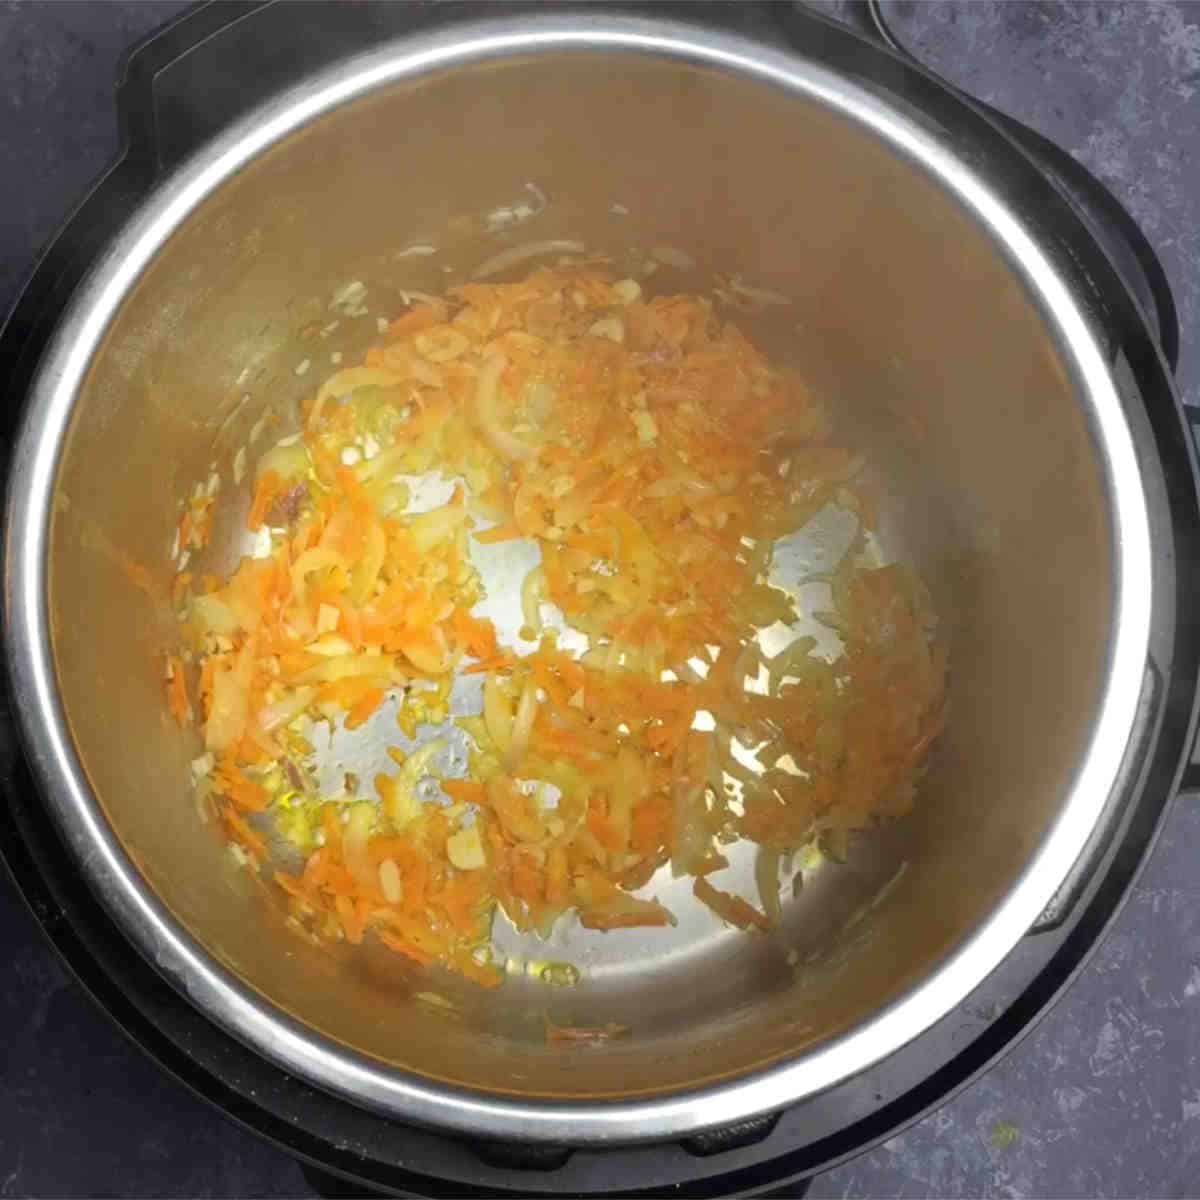 Saute onions and carrots in the Instant Pot.